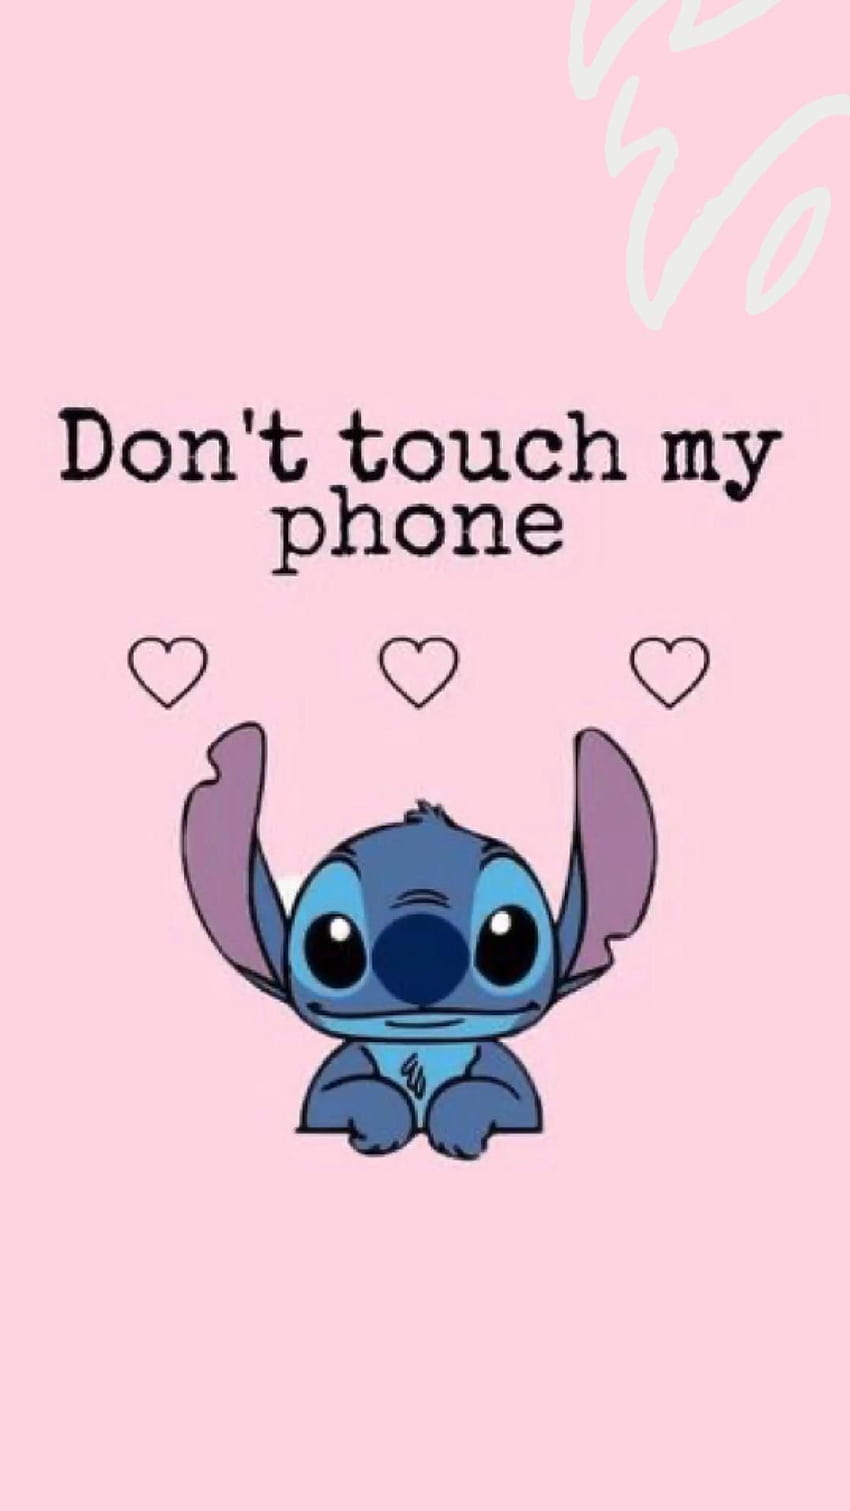 Stitch phone wallpaper, cute phone wallpaper, don't touch my phone wallpaper, phone background, phone wallpaper, phone lock screen, phone screensaver, phone background, phone lock screen, phone screensaver, phone background, phone lock screen, phone screensaver, phone background, phone lock screen, phone screensaver, phone background, phone lock screen, phone screensaver - Don't touch my phone